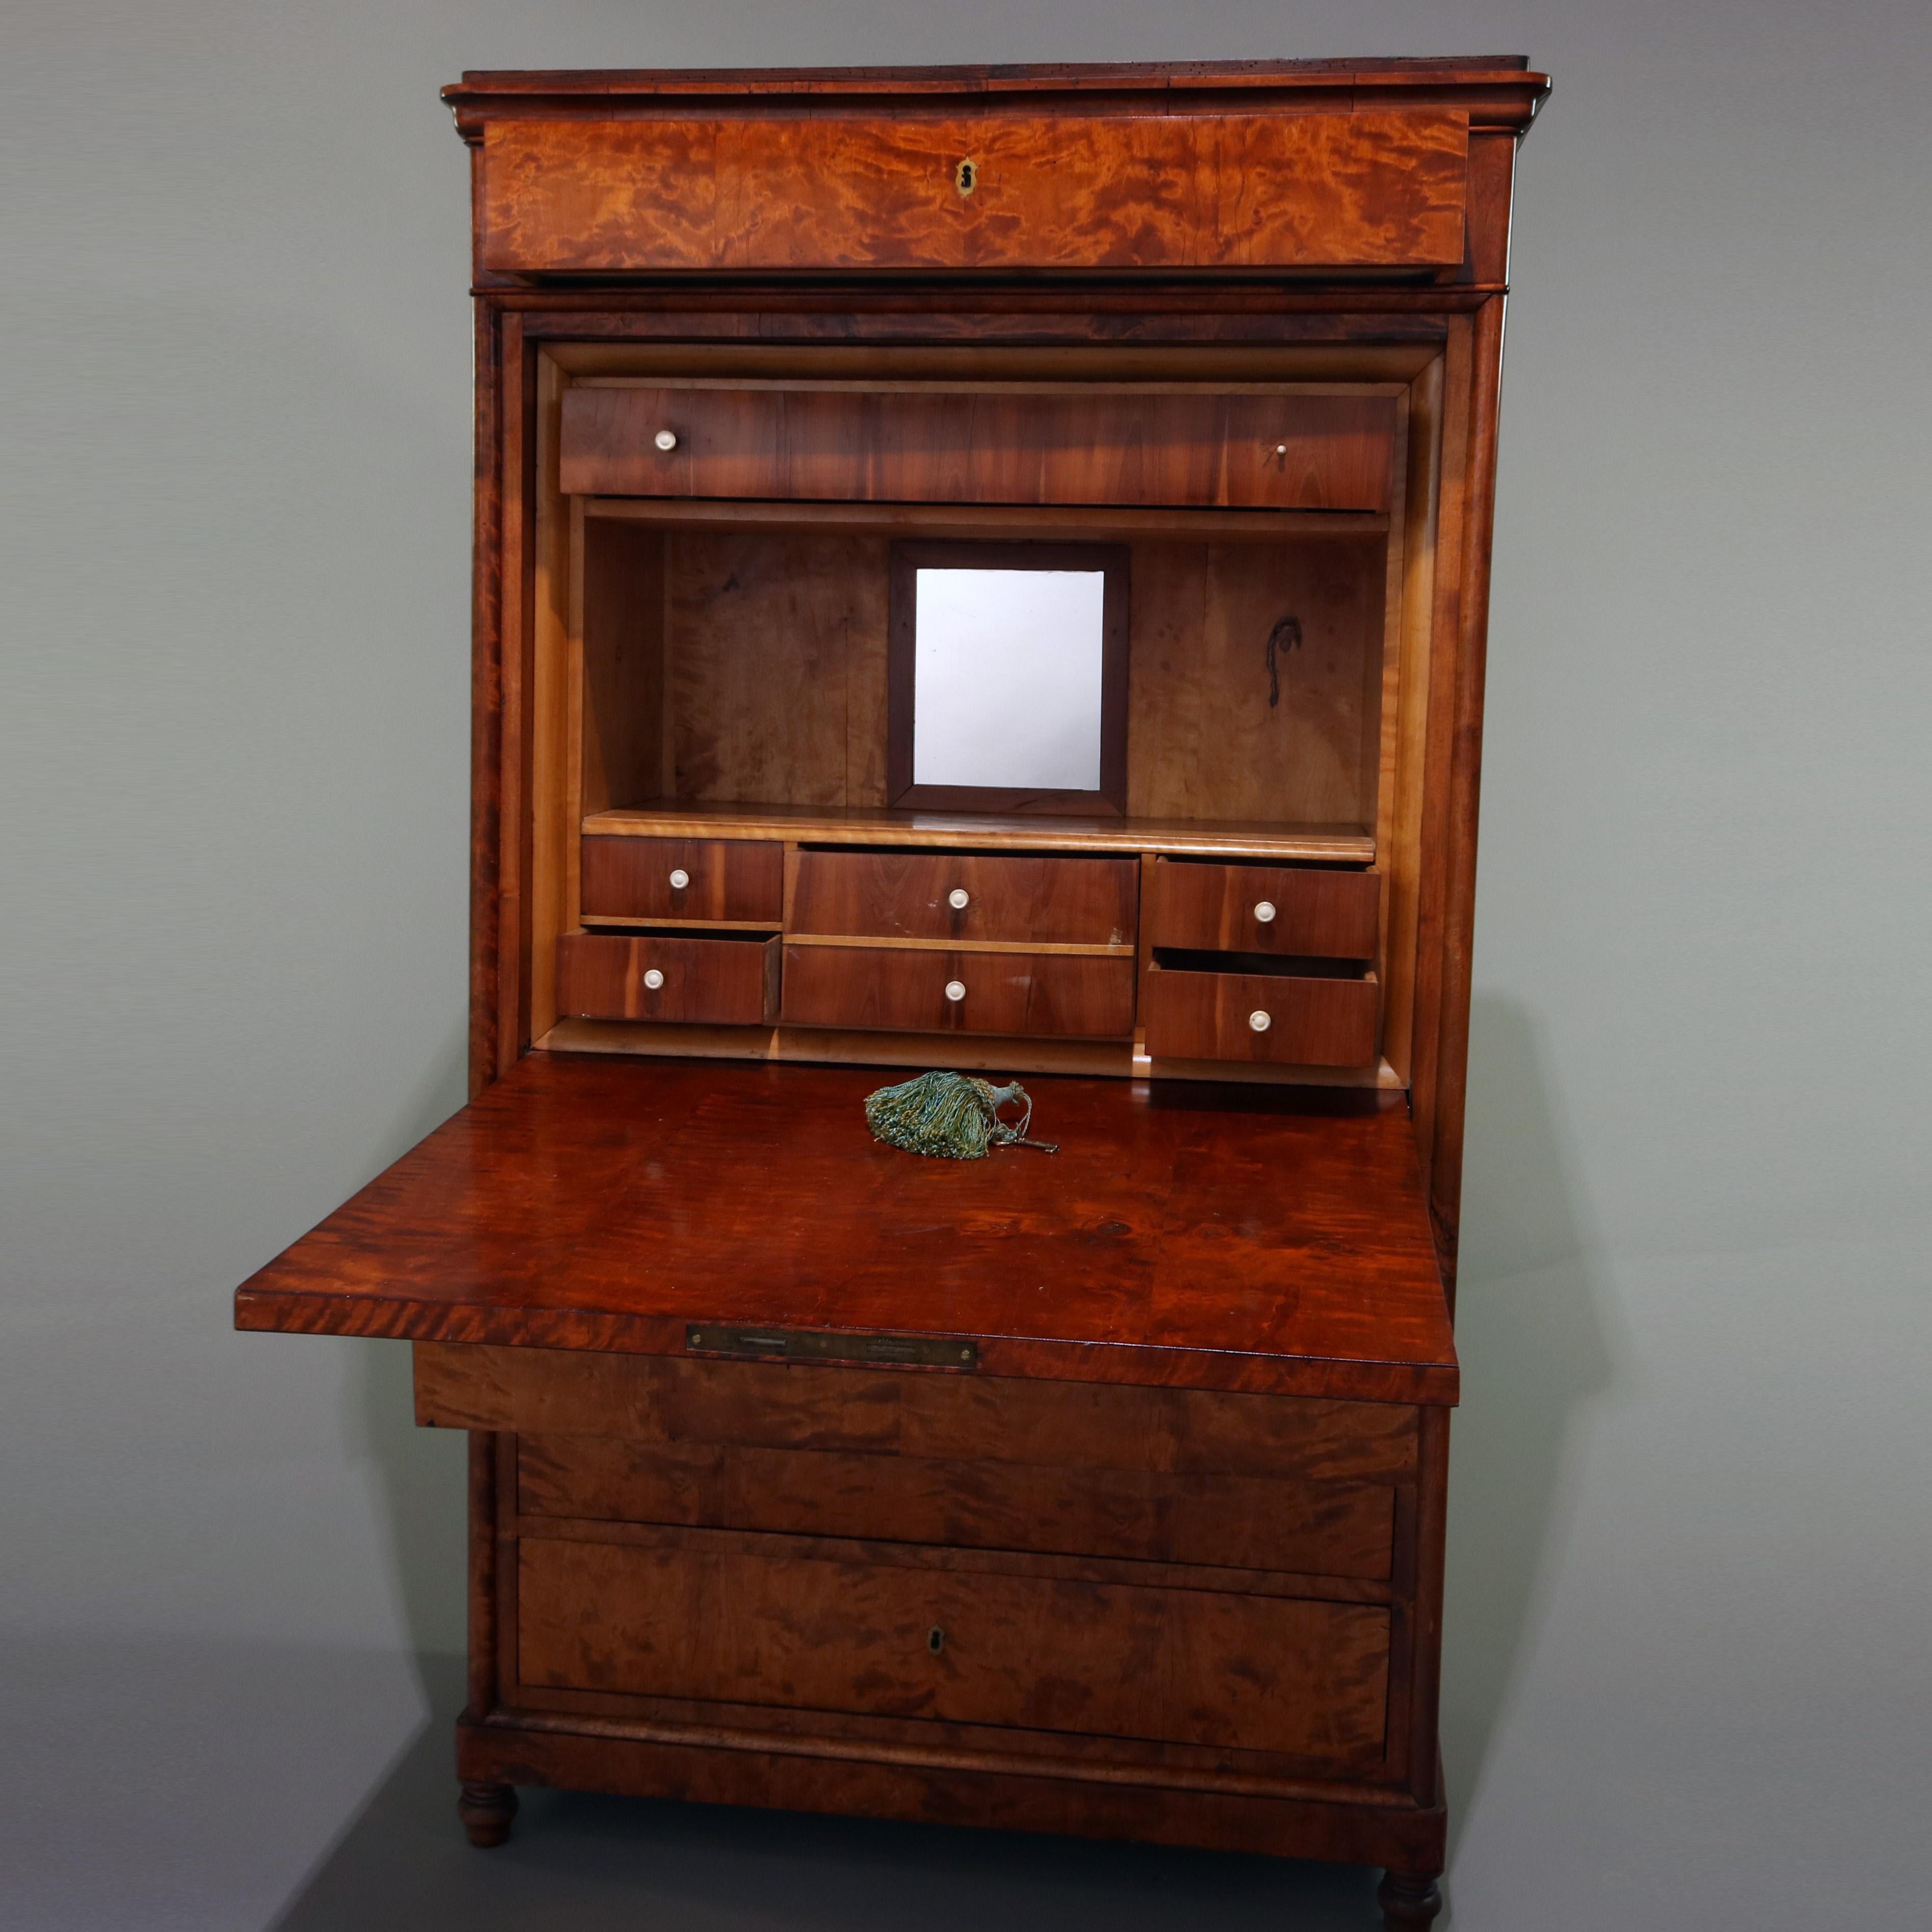 An antique English Biedermeier Abattant secretary features burl wood construction with frieze drawer surmounting drop front secretary opening to reveal writing surface and interior storage compartments and drawers over three lower long drawers and